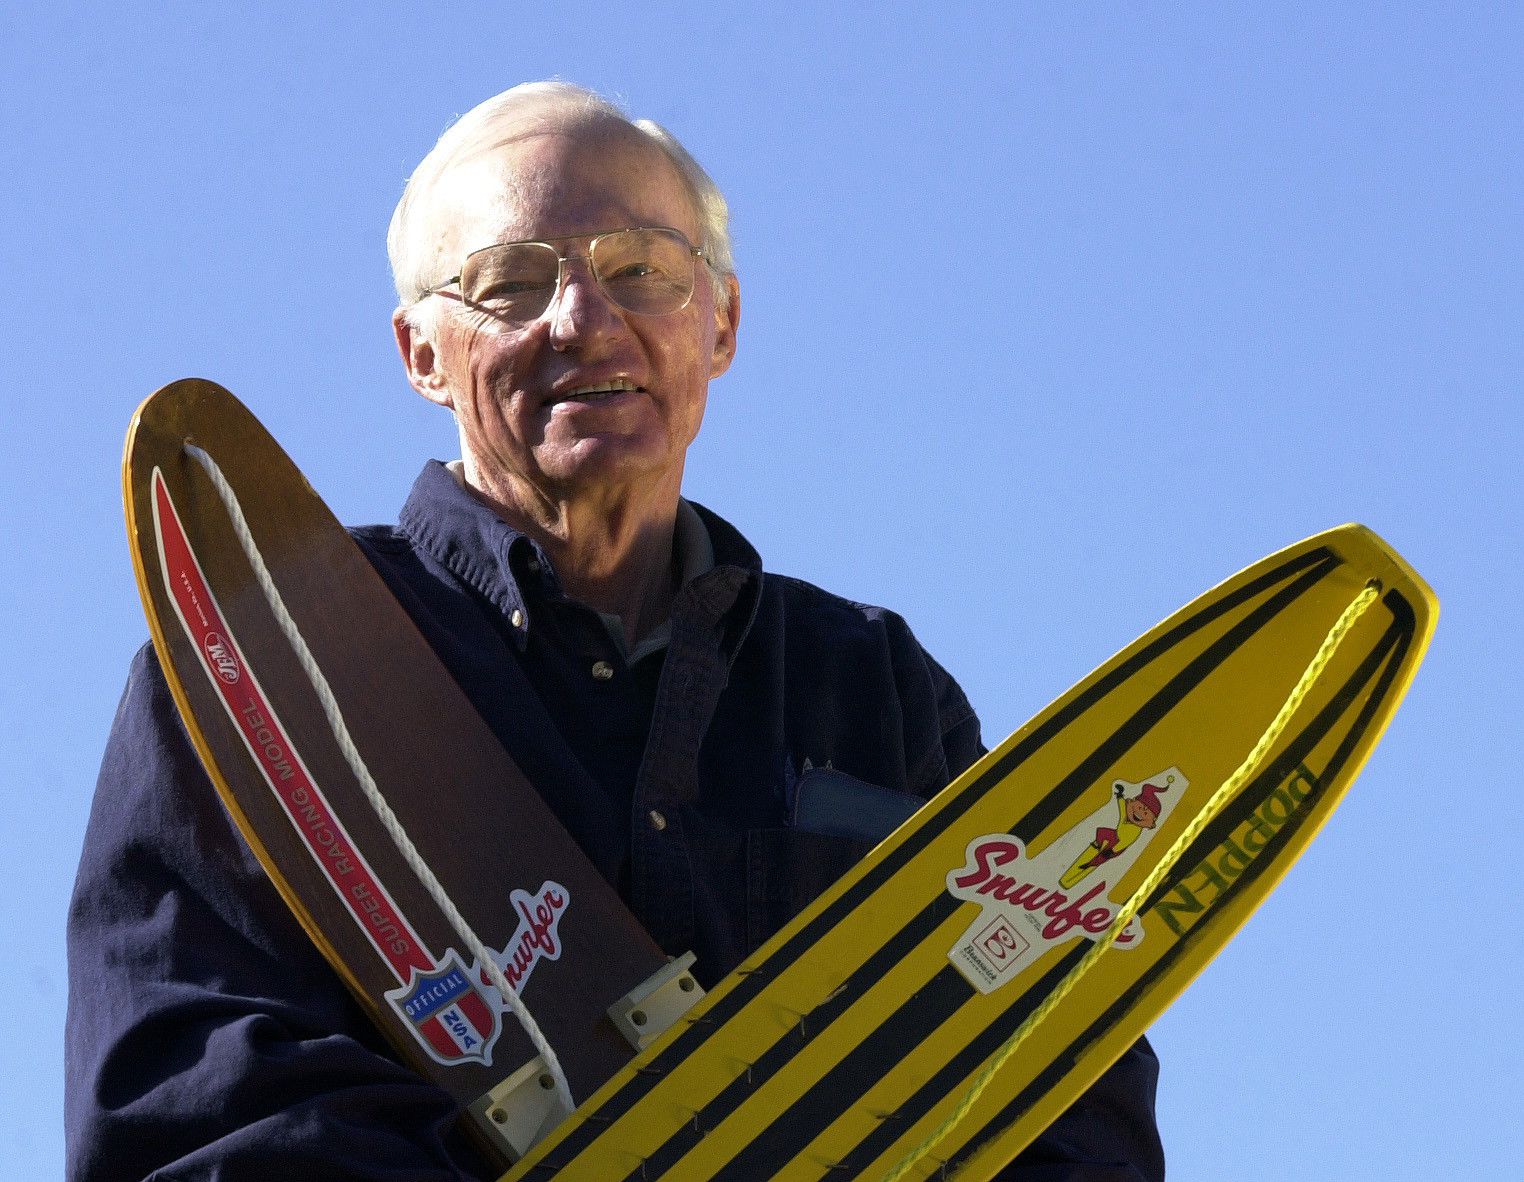 Father of snowboarding, a Muskegon native, -